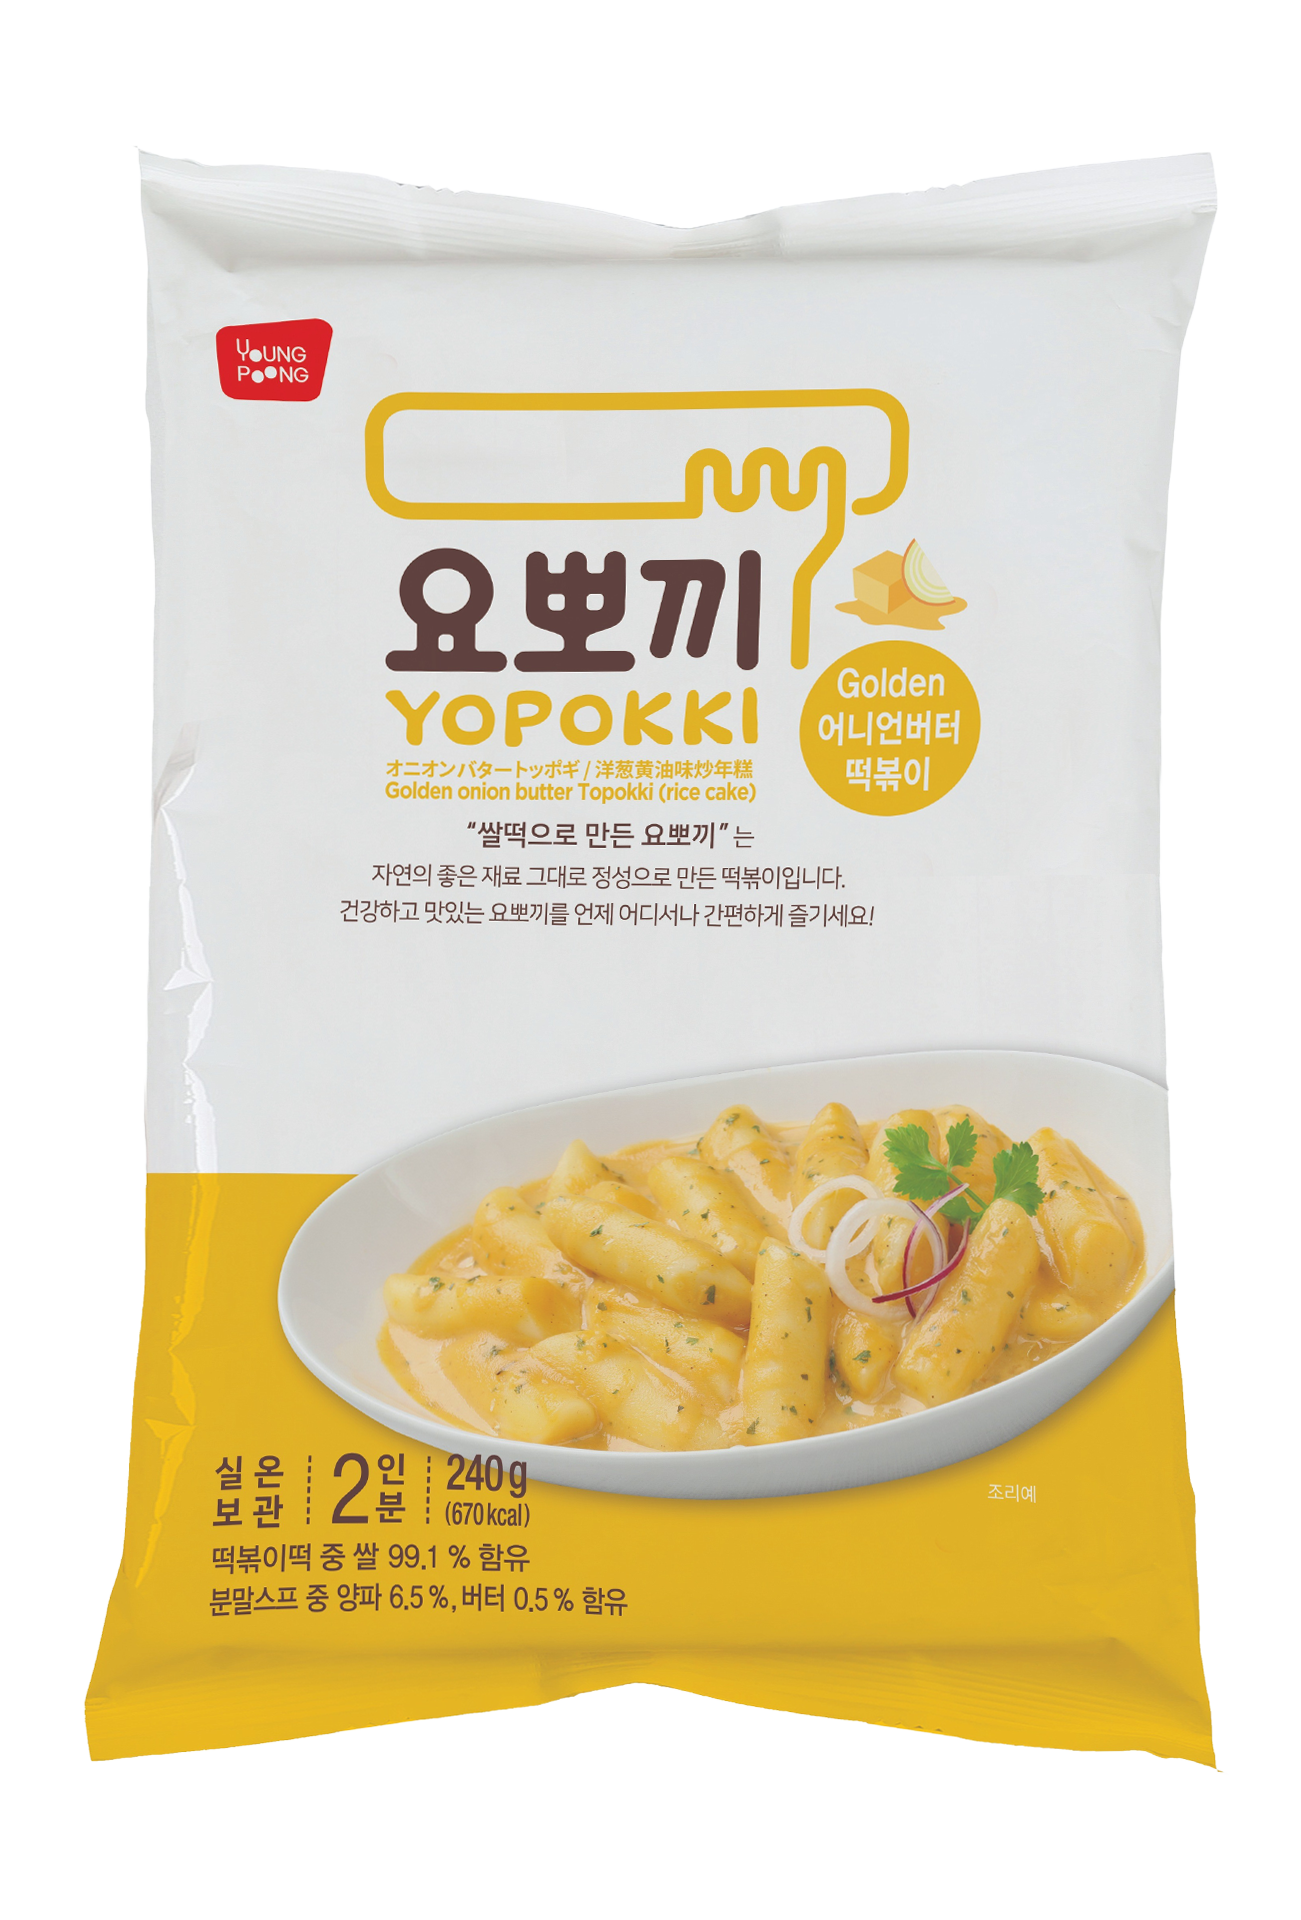 Topokki Pouch (for two) Golden onion butter by YOPOKKI